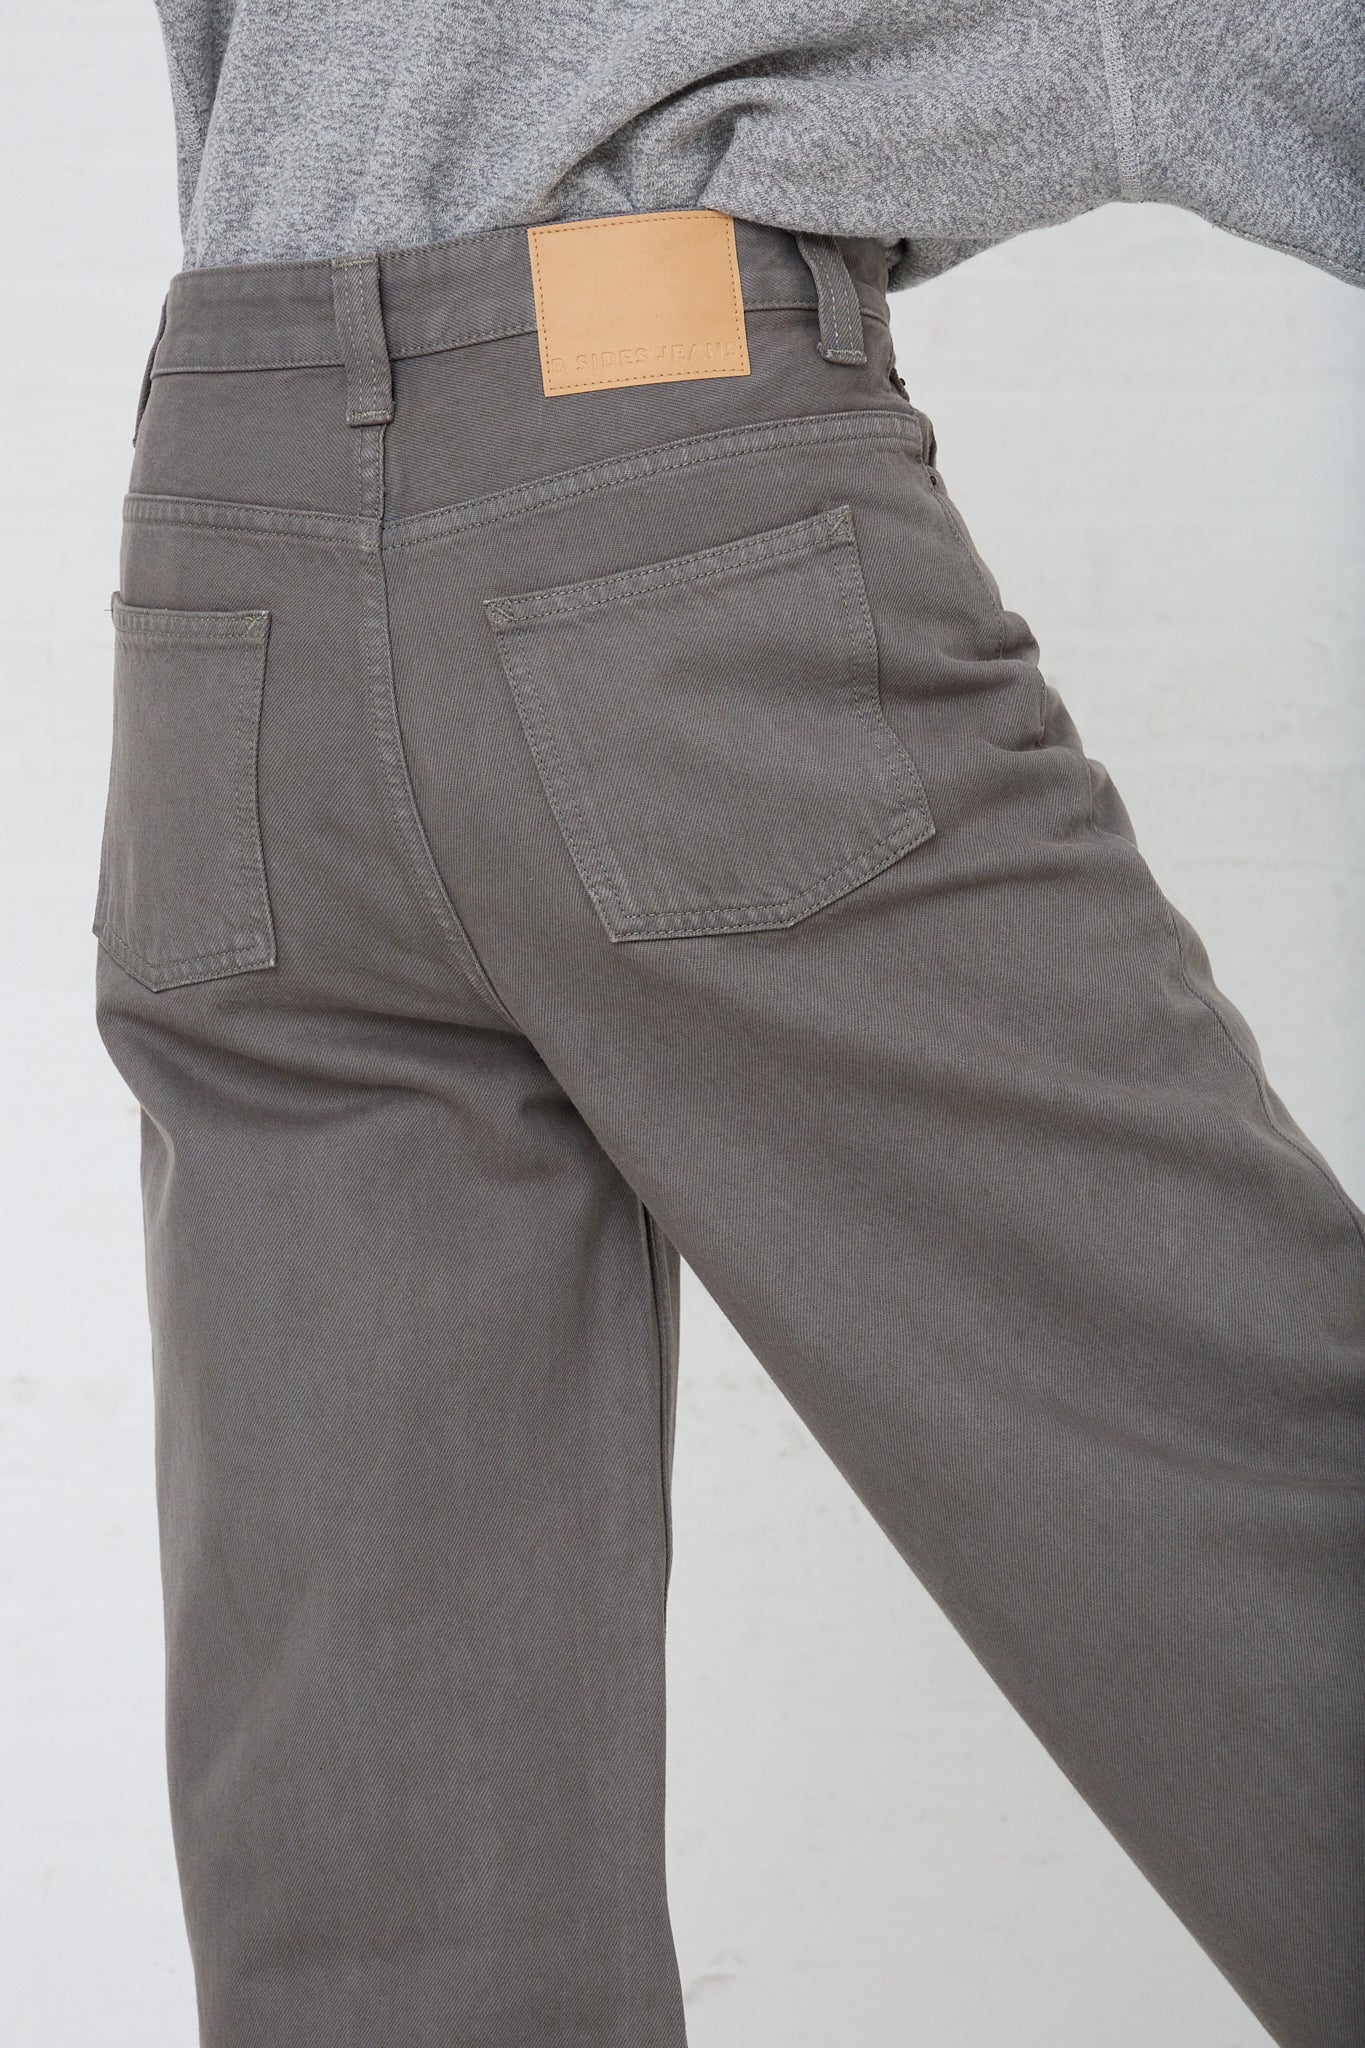 The back view of a model showcases B Sides Easy Mid Relaxed Jean in Olive Overdye with a tapered leg.